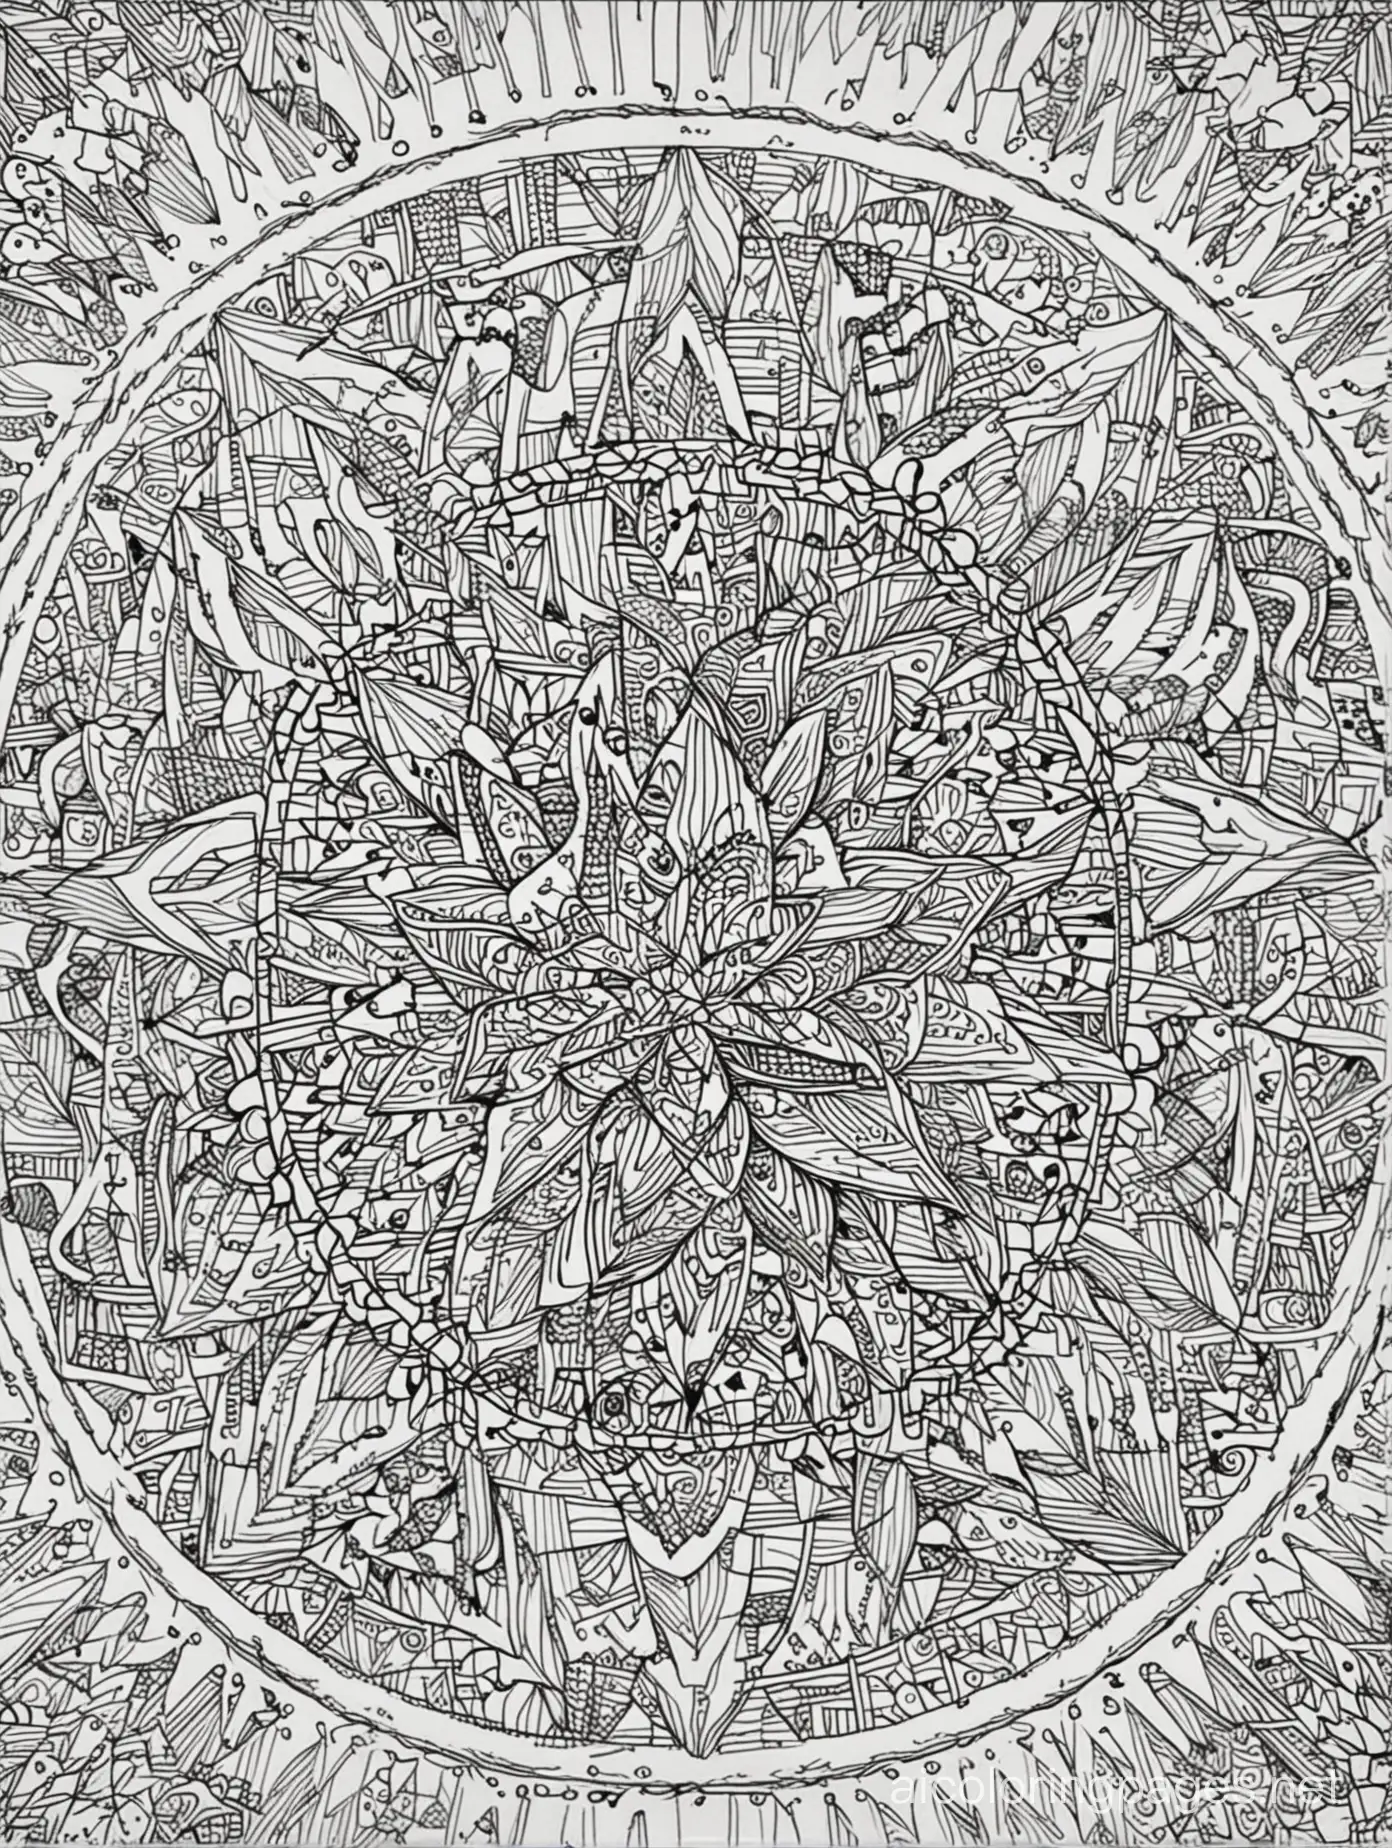 fine line art coloring page, black and white,  with a mandala background, and a star in the middle, Coloring Page, black and white, line art, white background, Simplicity, Ample White Space. The background of the coloring page is plain white to make it easy for young children to color within the lines. The outlines of all the subjects are easy to distinguish, making it simple for kids to color without too much difficulty